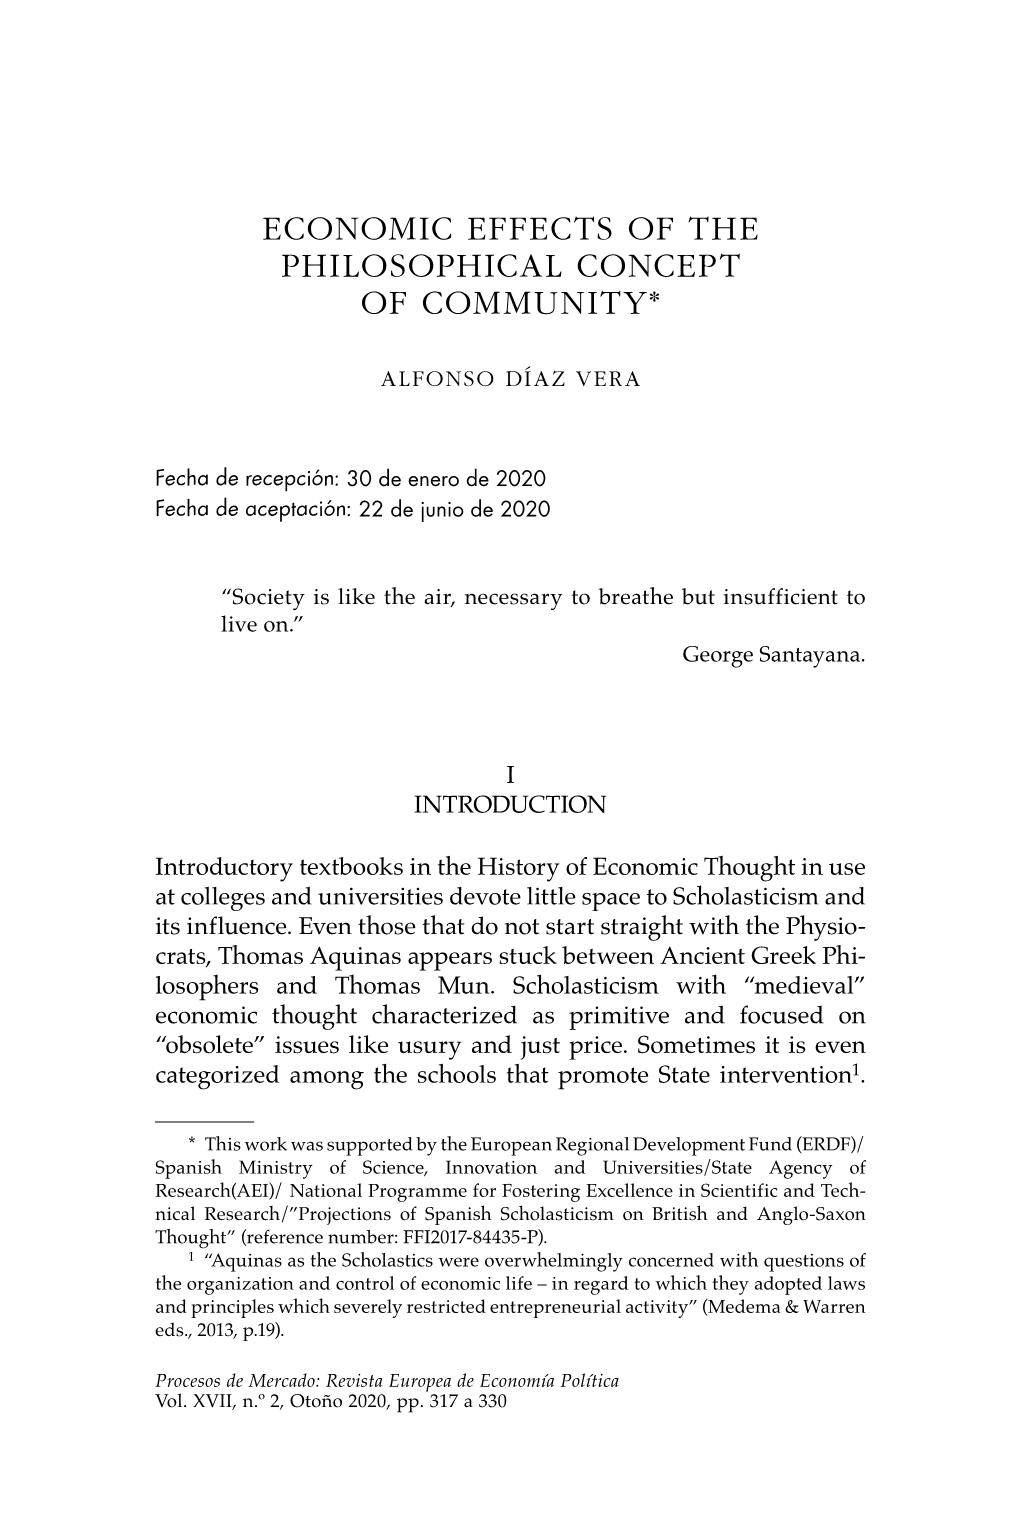 Economic Effects of the Philosophical Concept of Community*